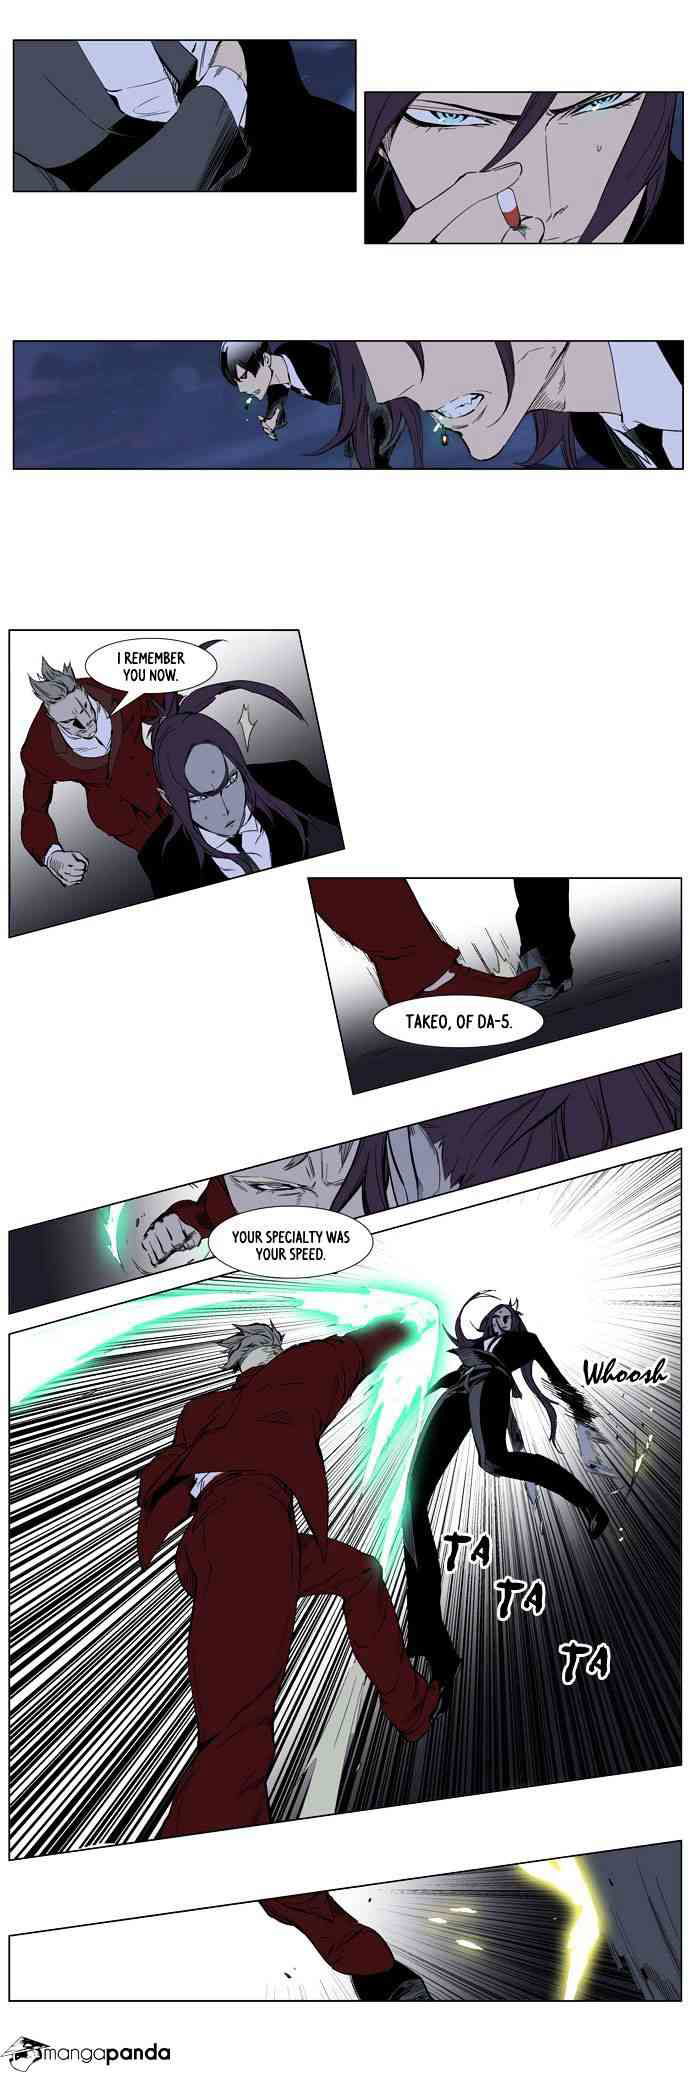 Noblesse Chapter 254 page 15